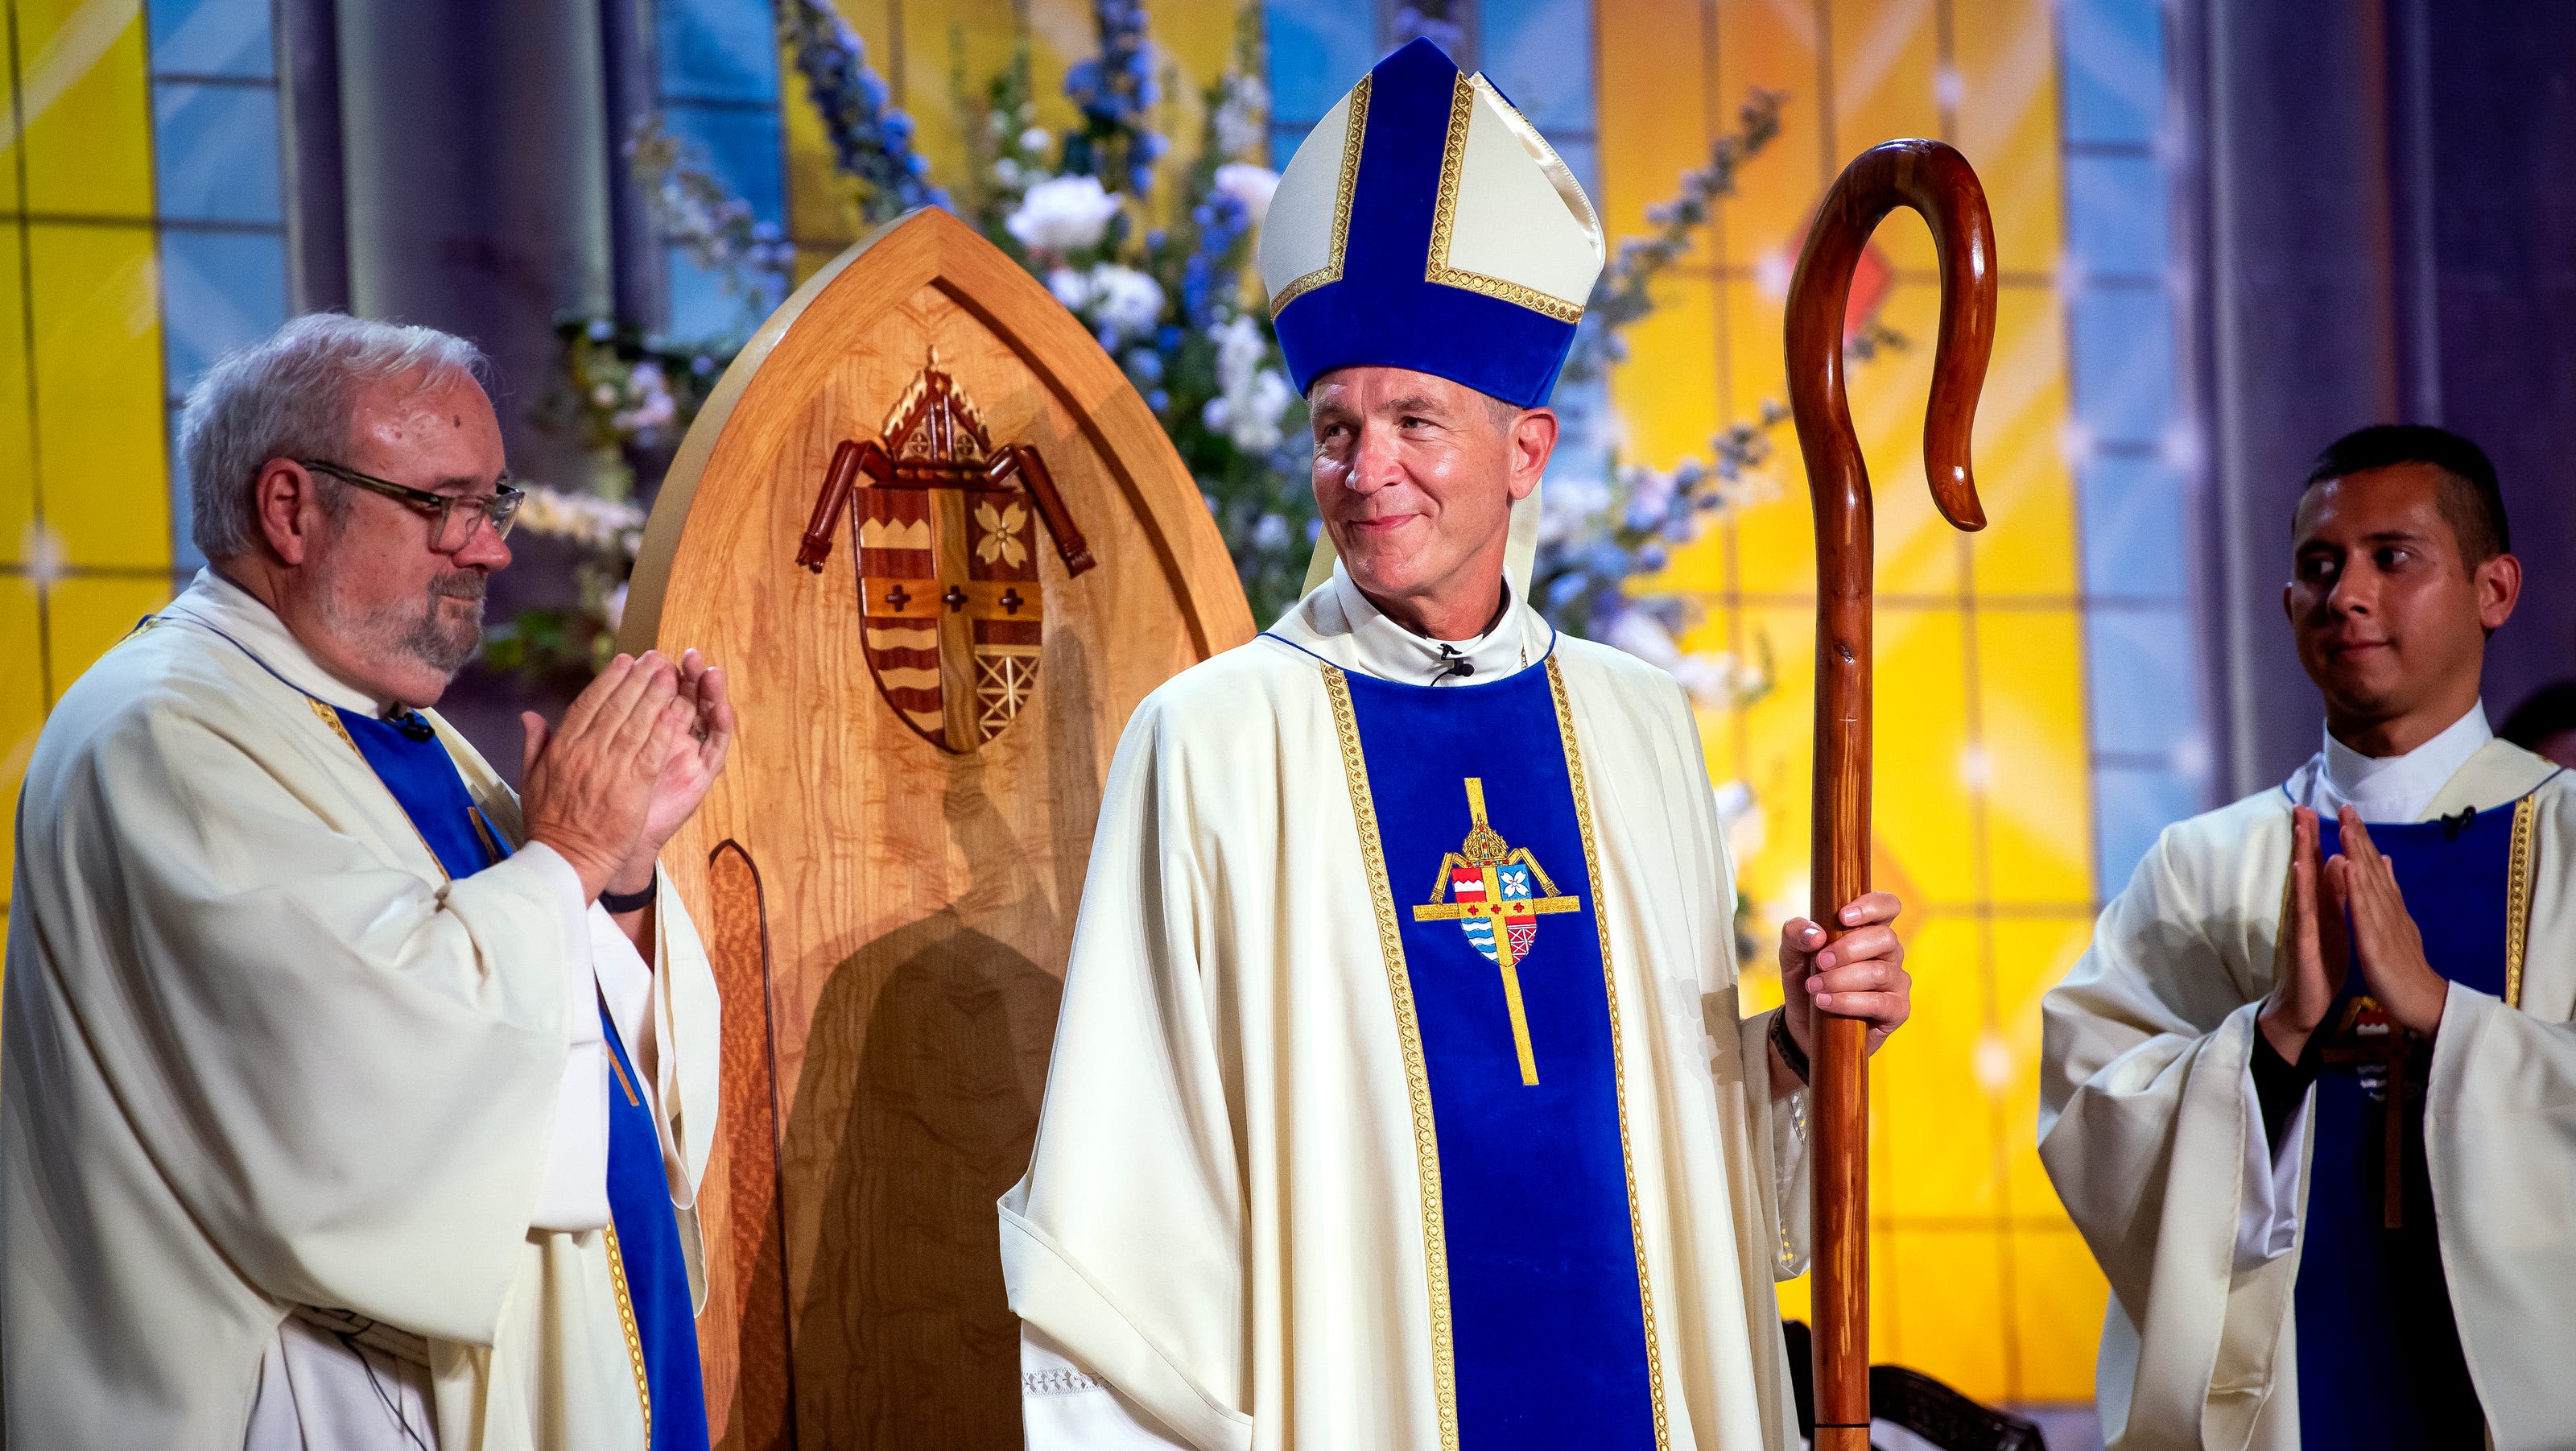 'A good bishop': Mark Beckman ordained as leader of Knoxville diocese